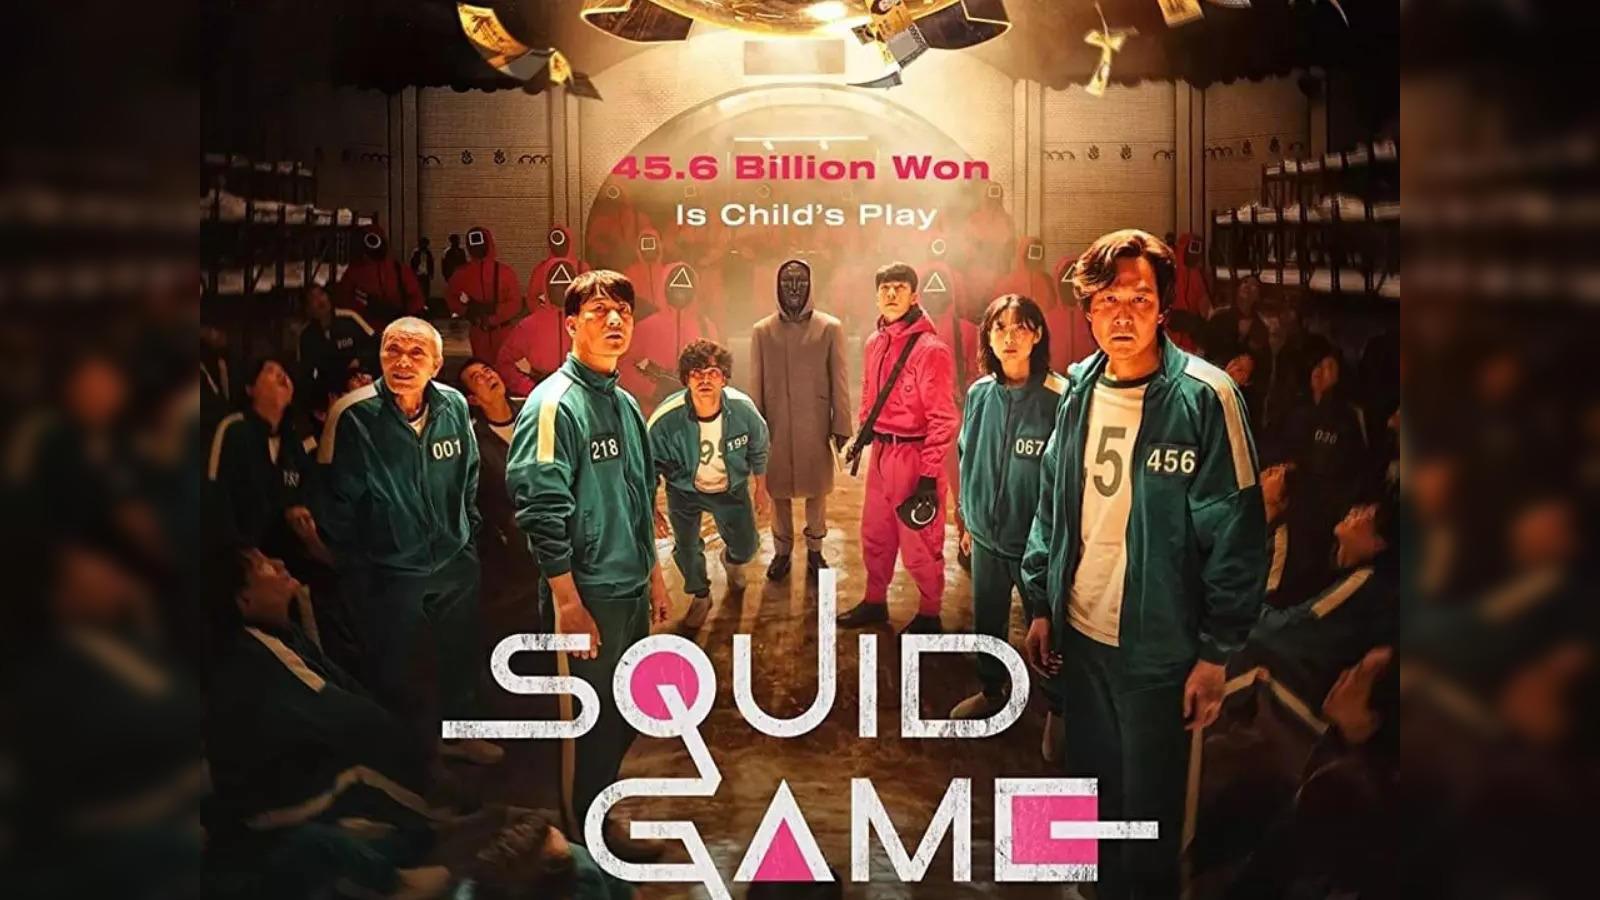 Squid Game' adds more stars to season 2 cast - The Korea Times